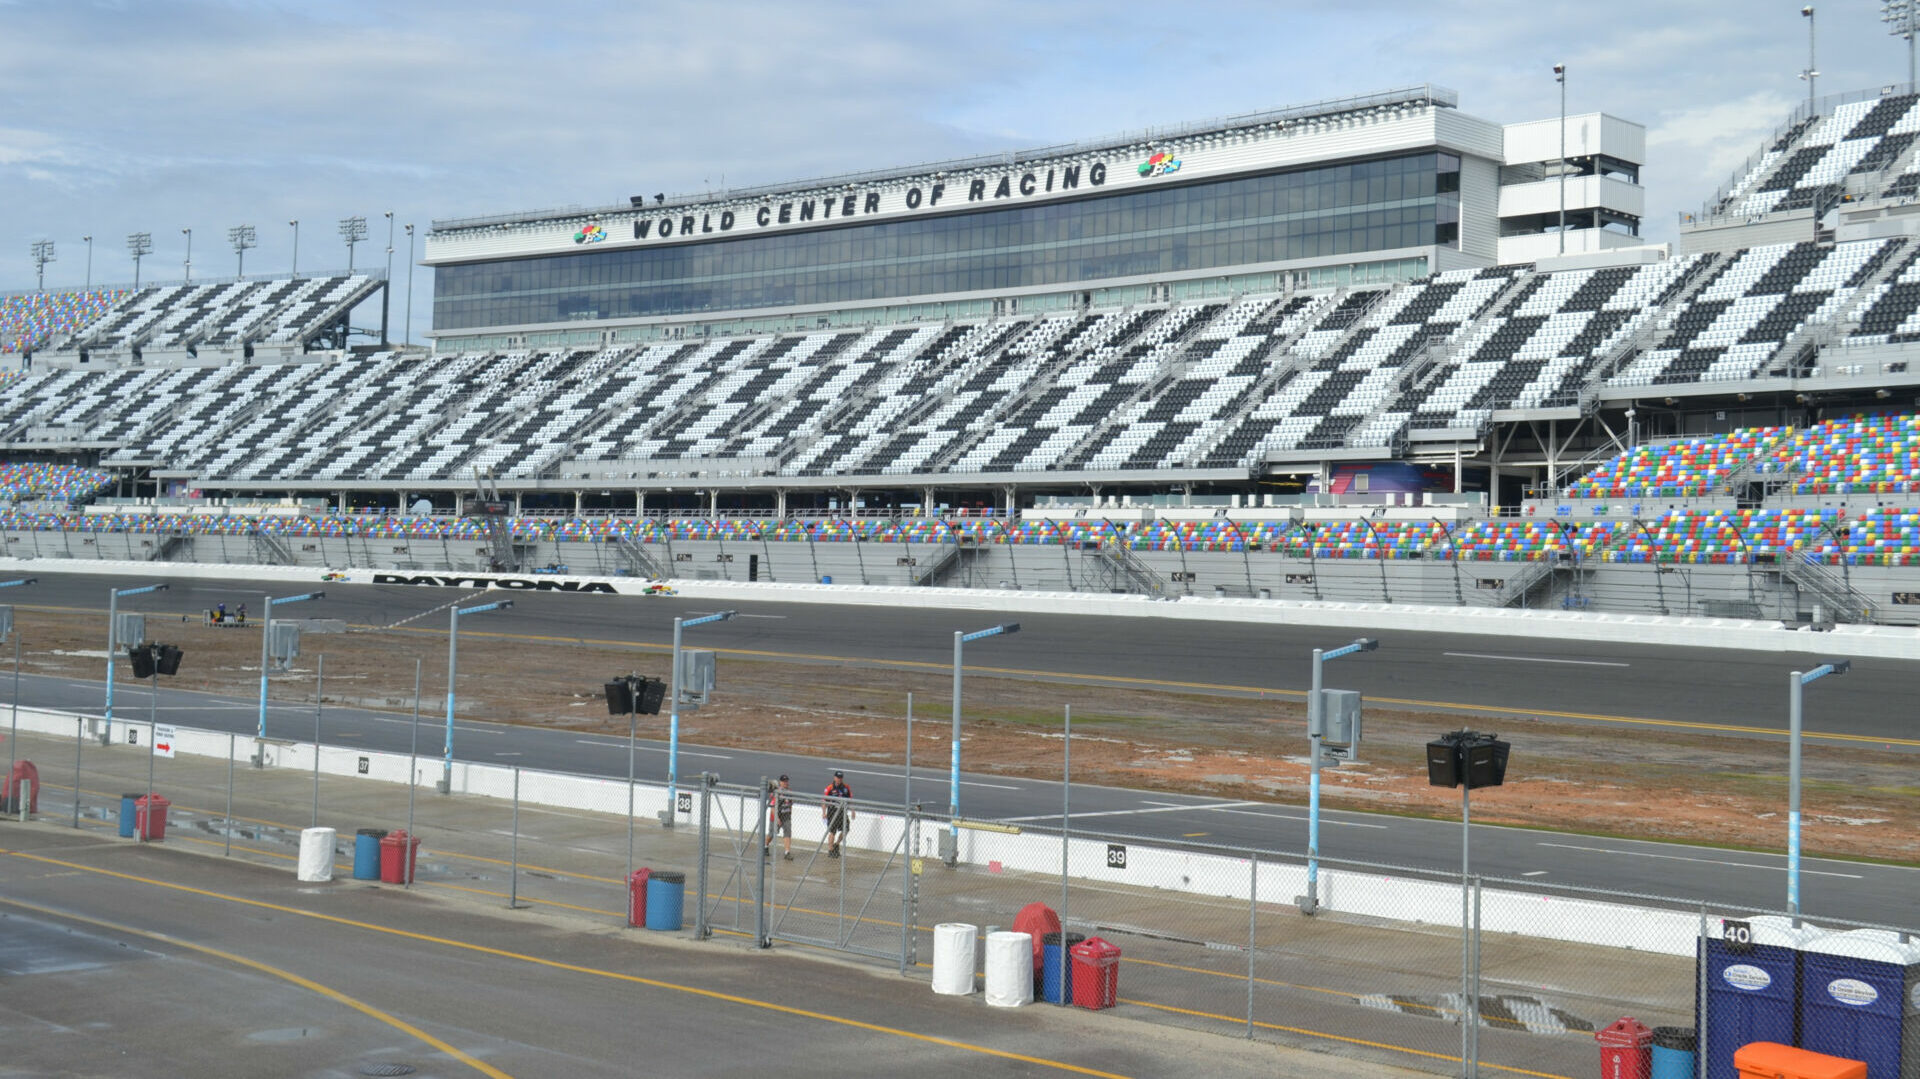 The tri-oval of Daytona International Speedway with water puddles visible on pit lane. Photo by David Swarts.